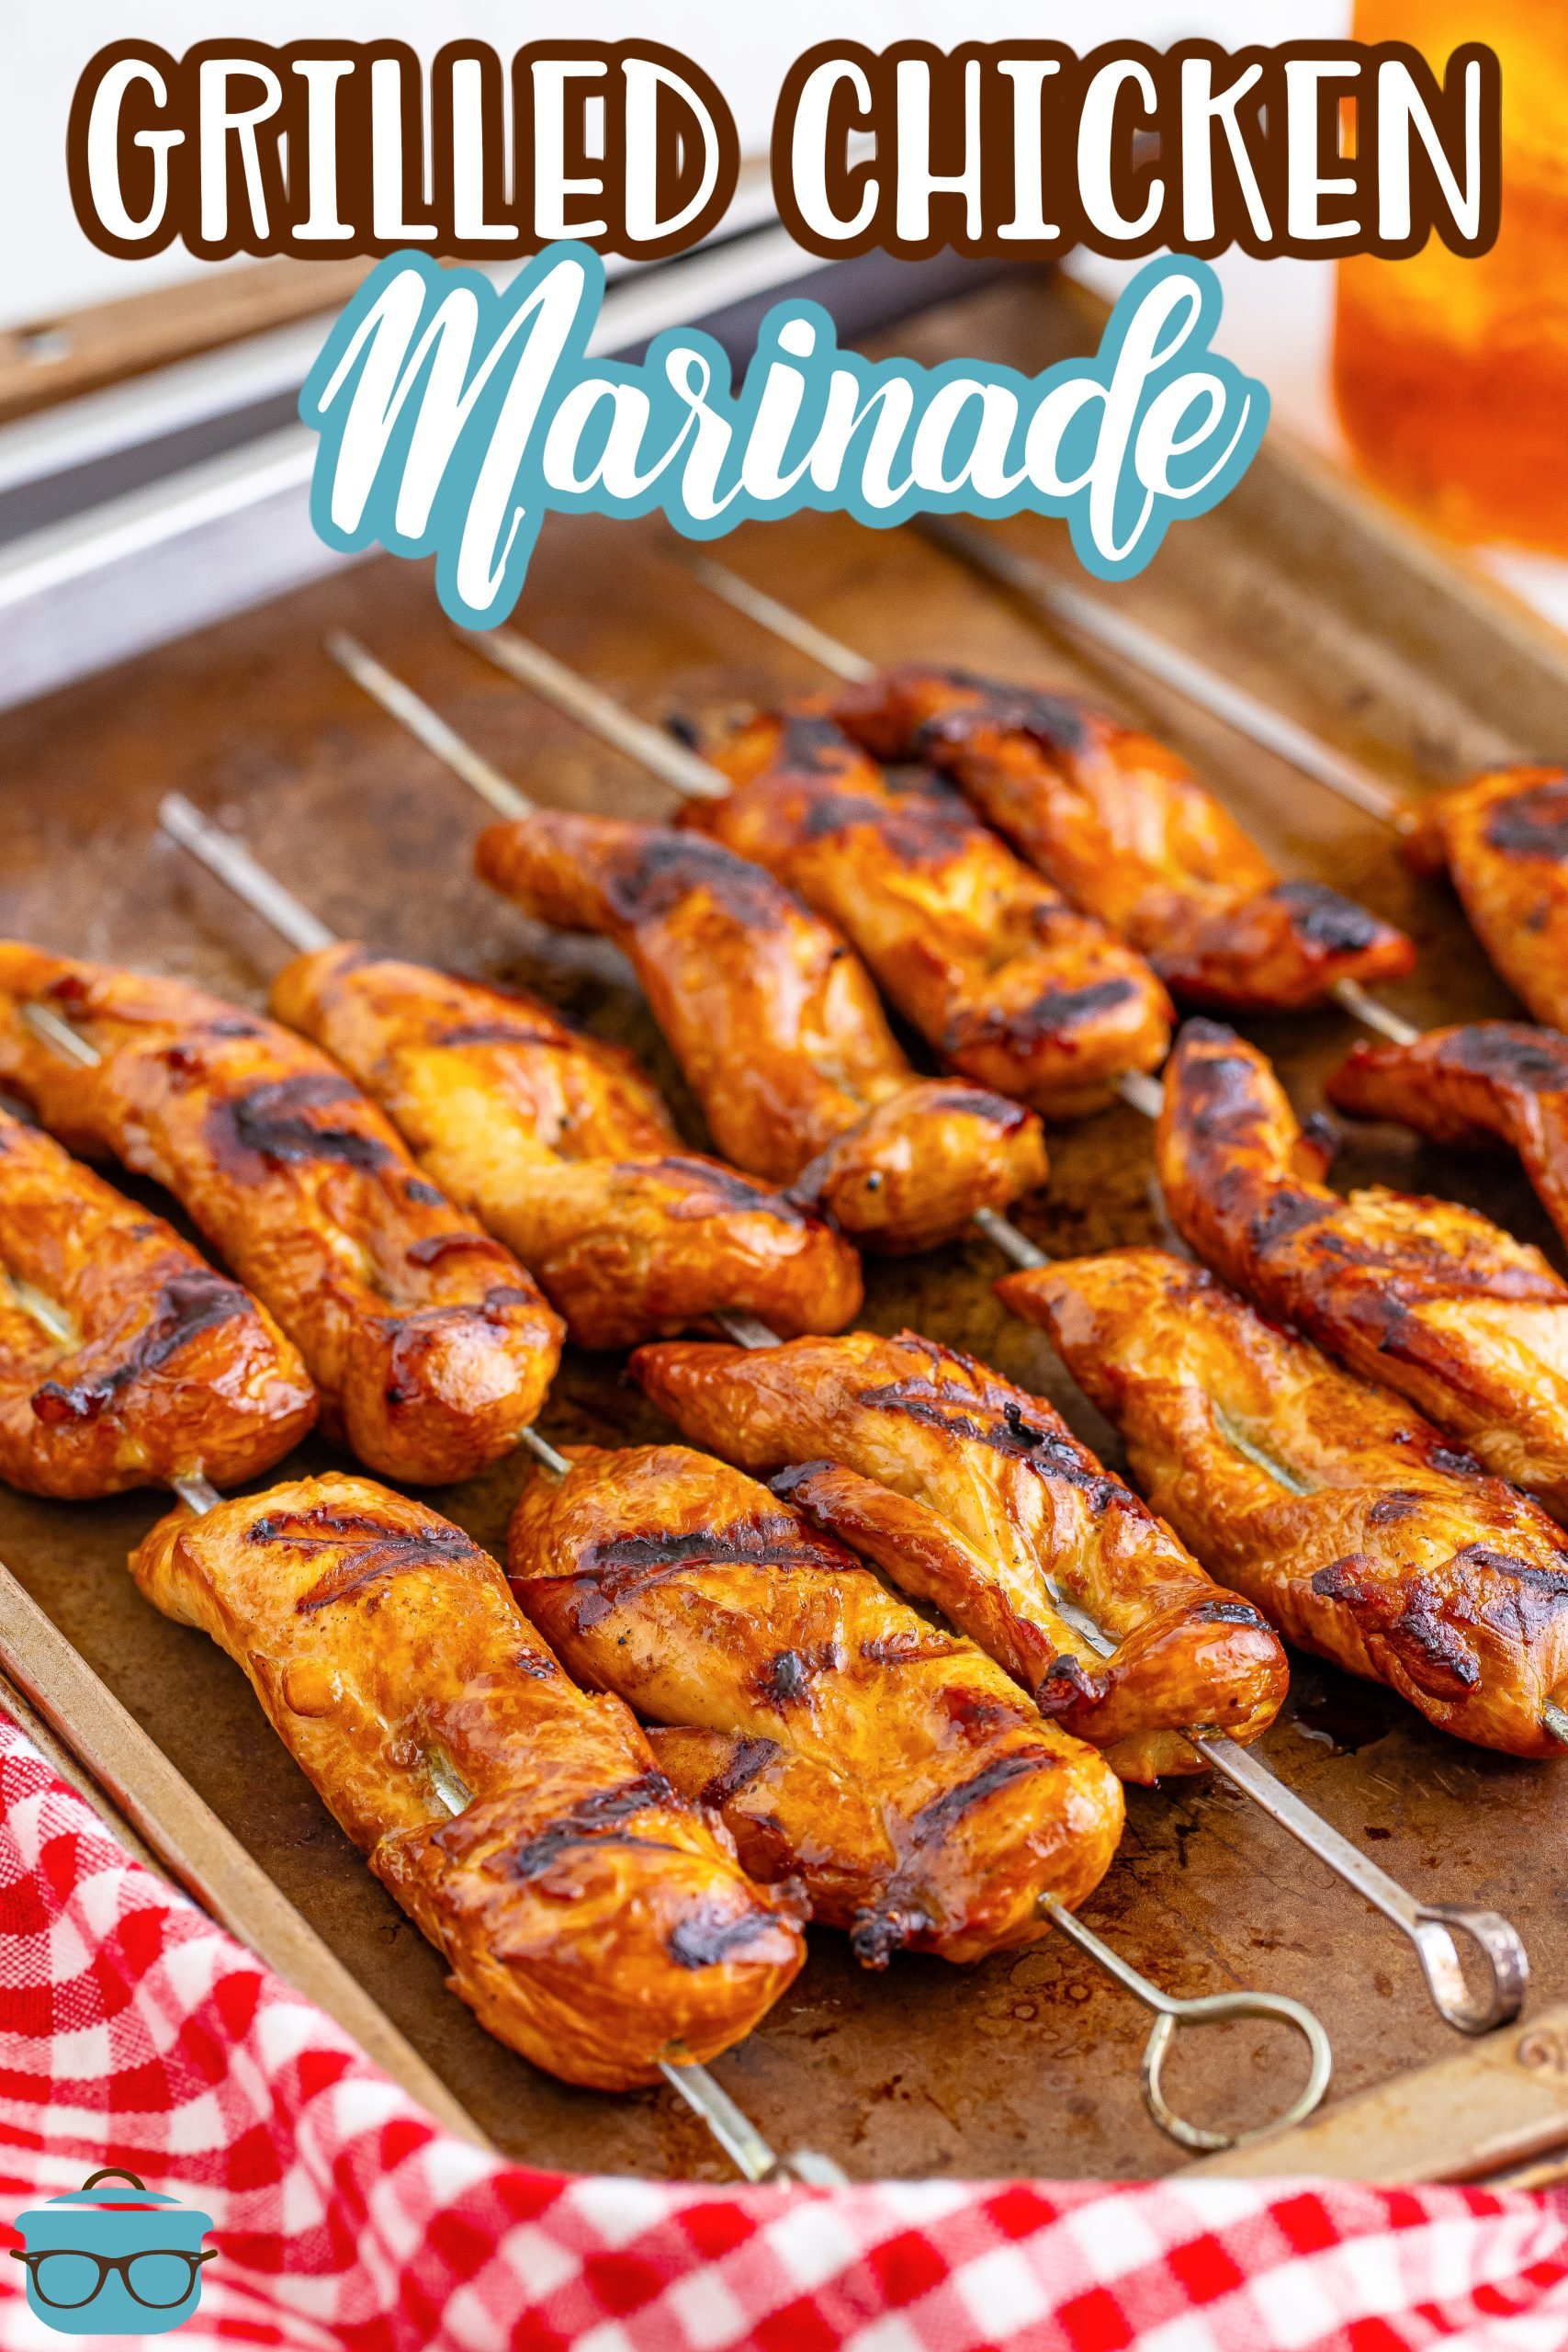 Skewers of marinated Grilled Chicken.